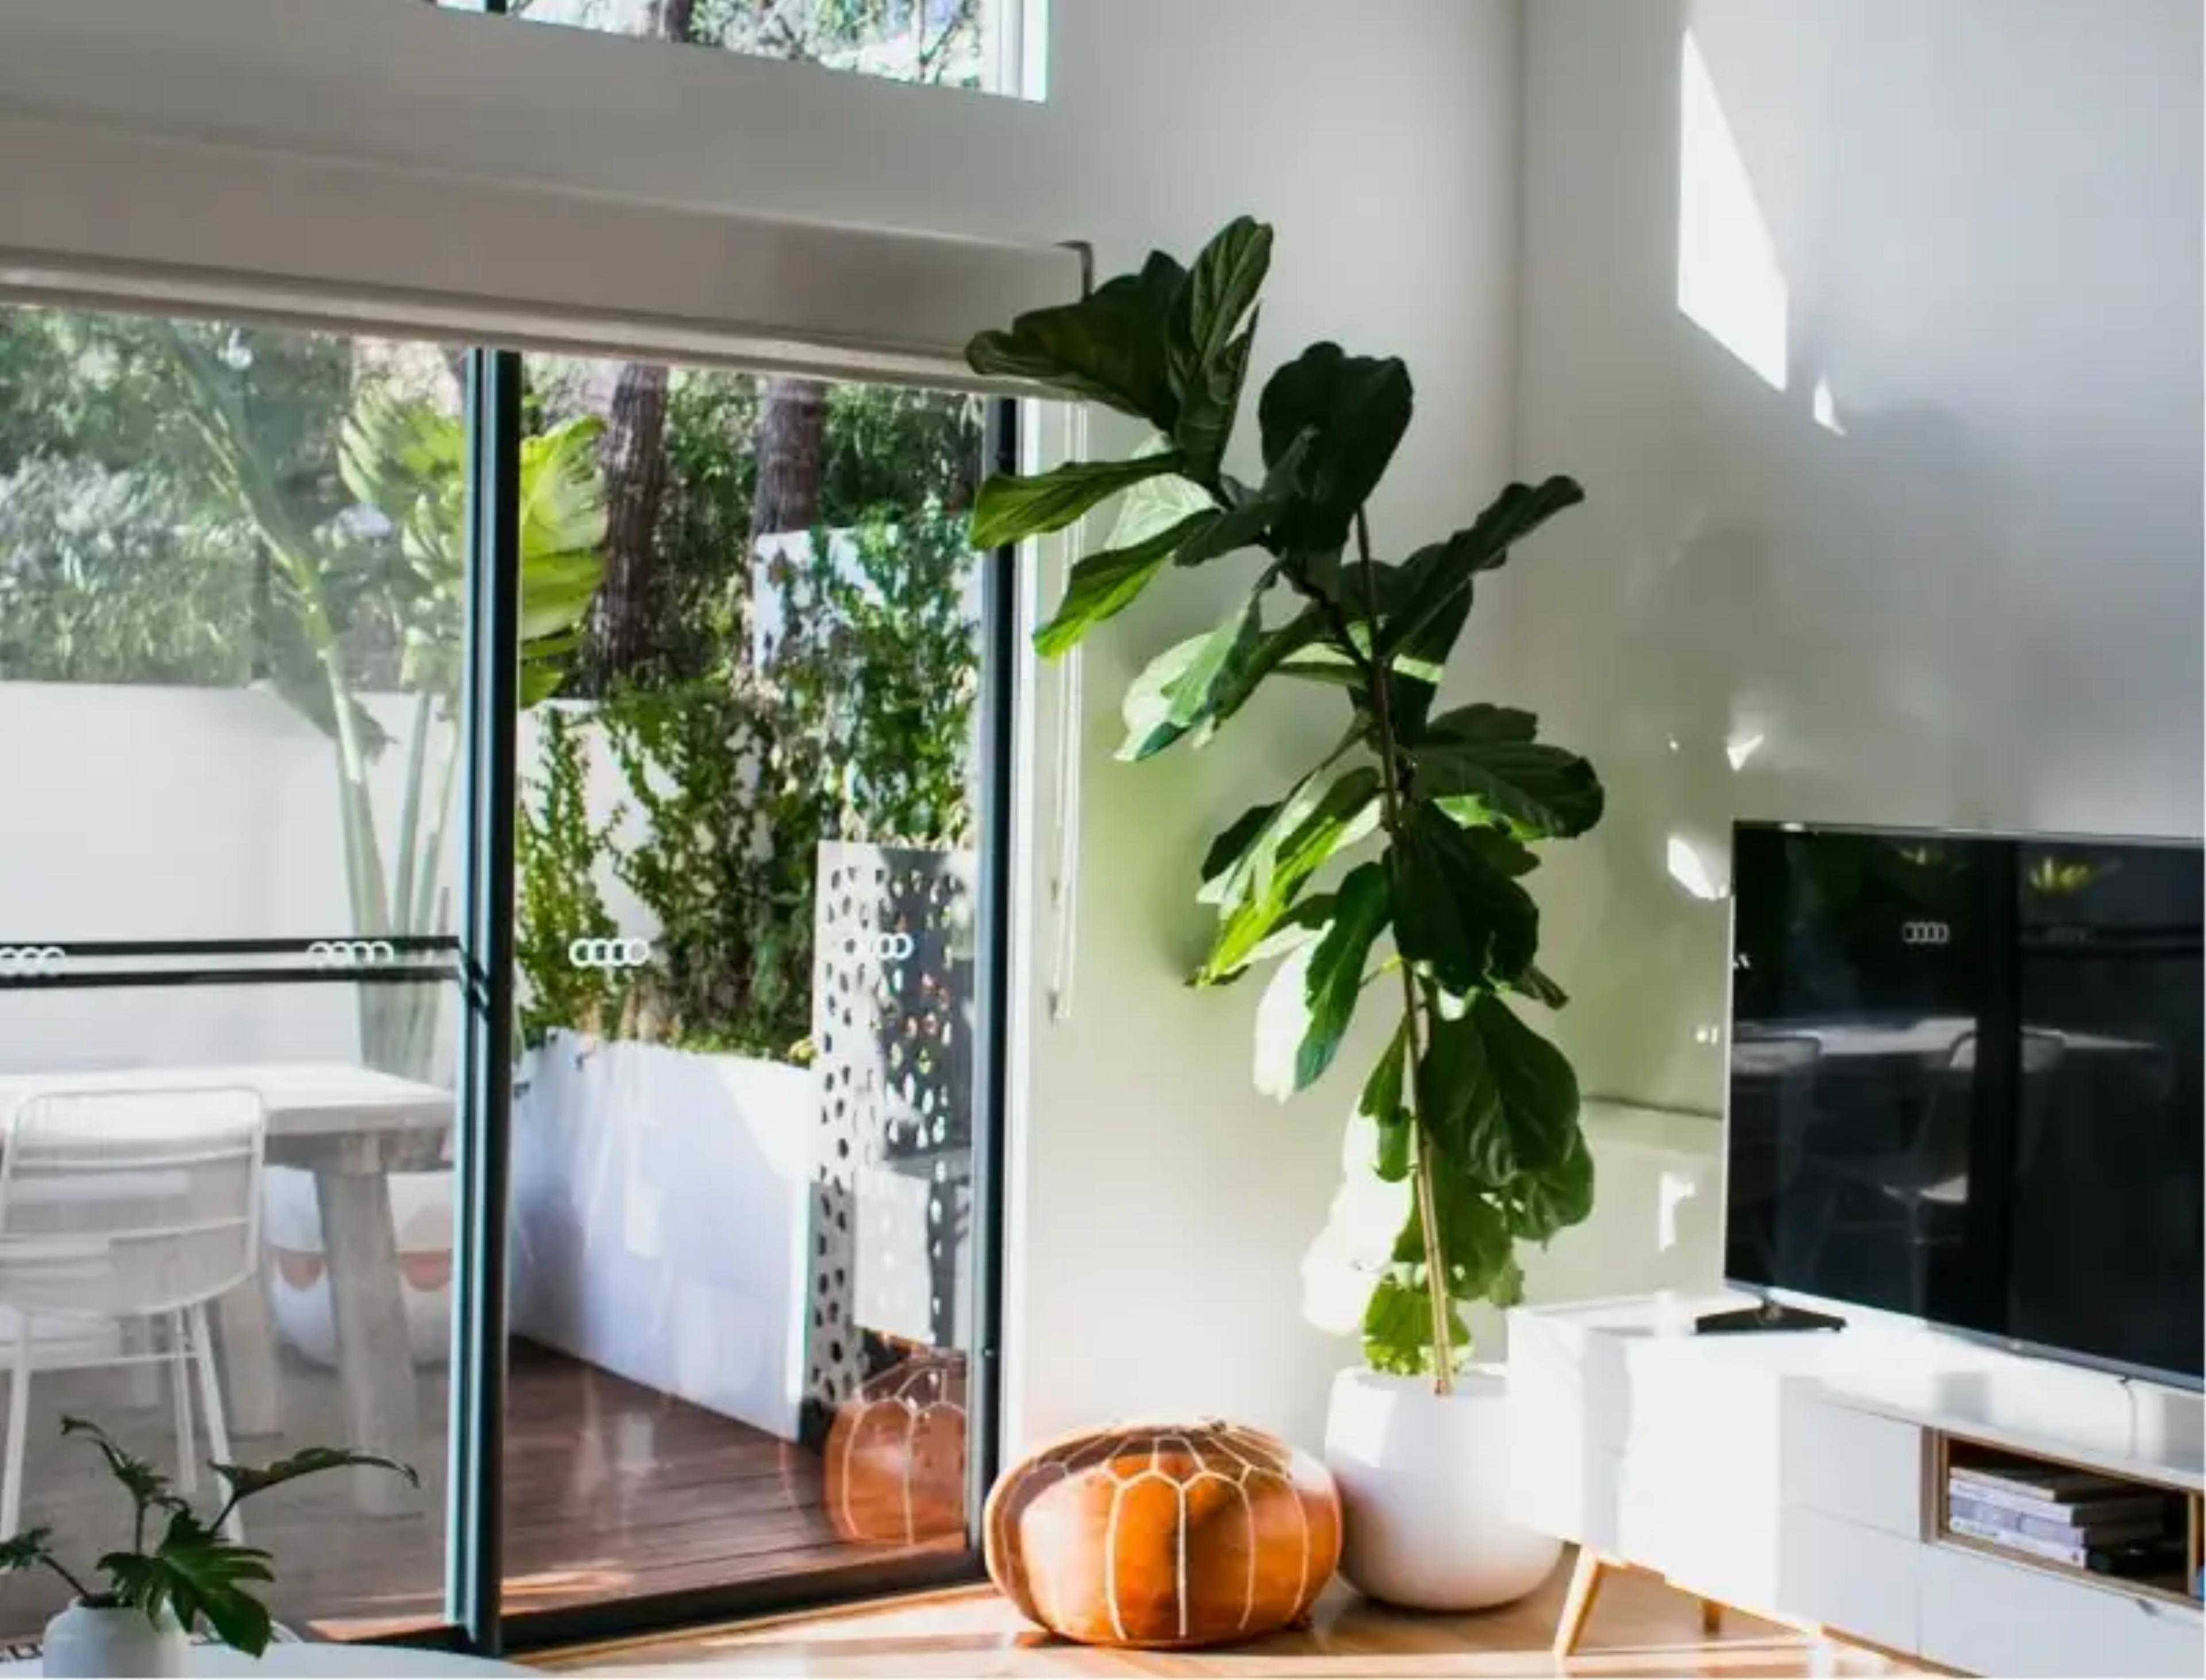 Living area with large house plant